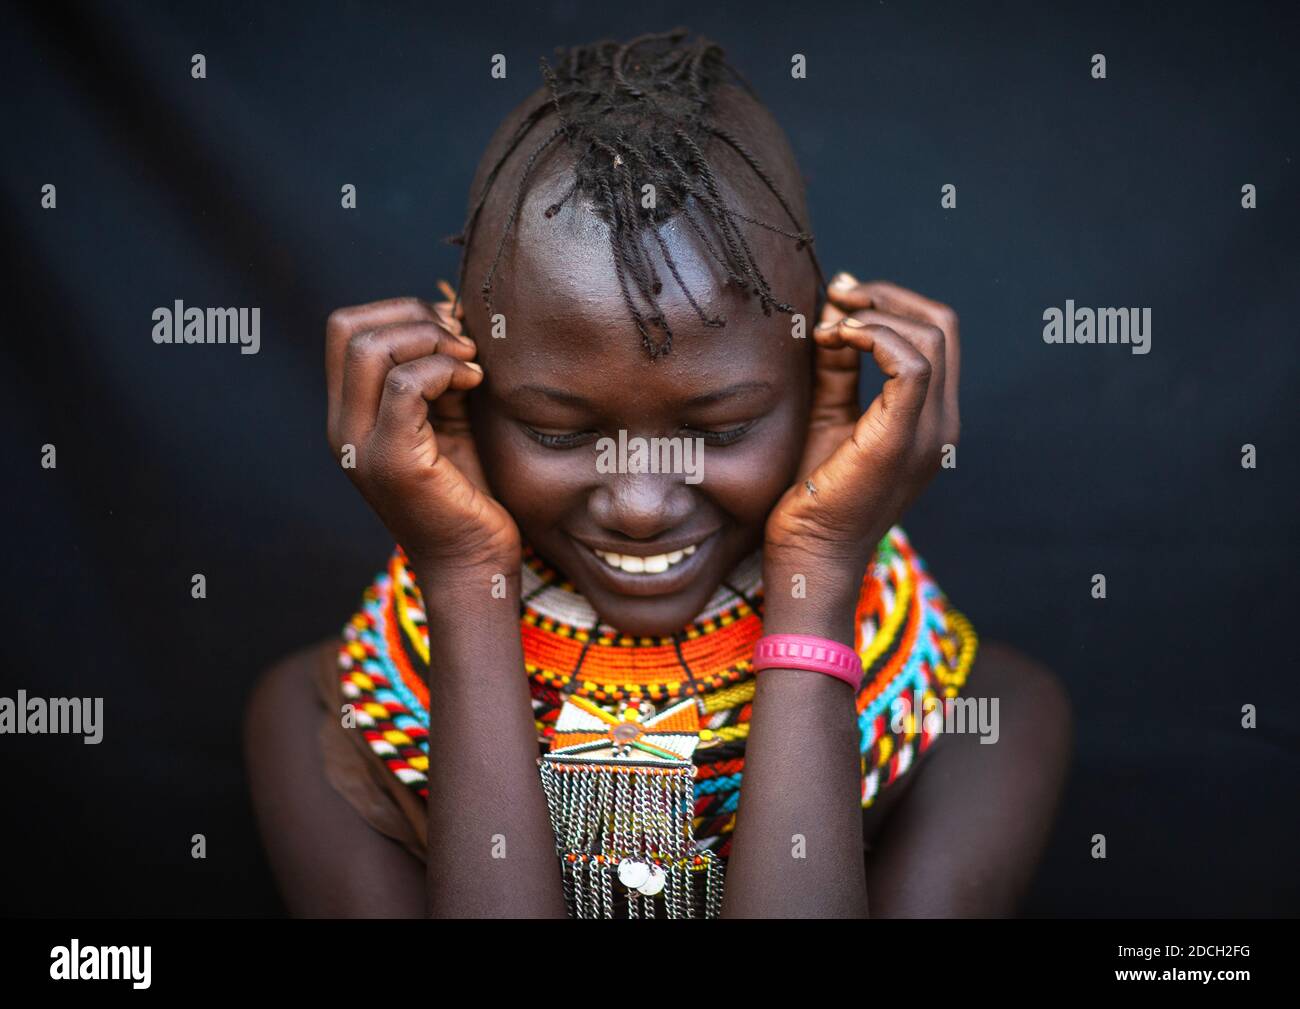 Smiling Turkana tribe woman with necklaces and earrings, Rift Valley Province, Turkana lake, Kenya Stock Photo